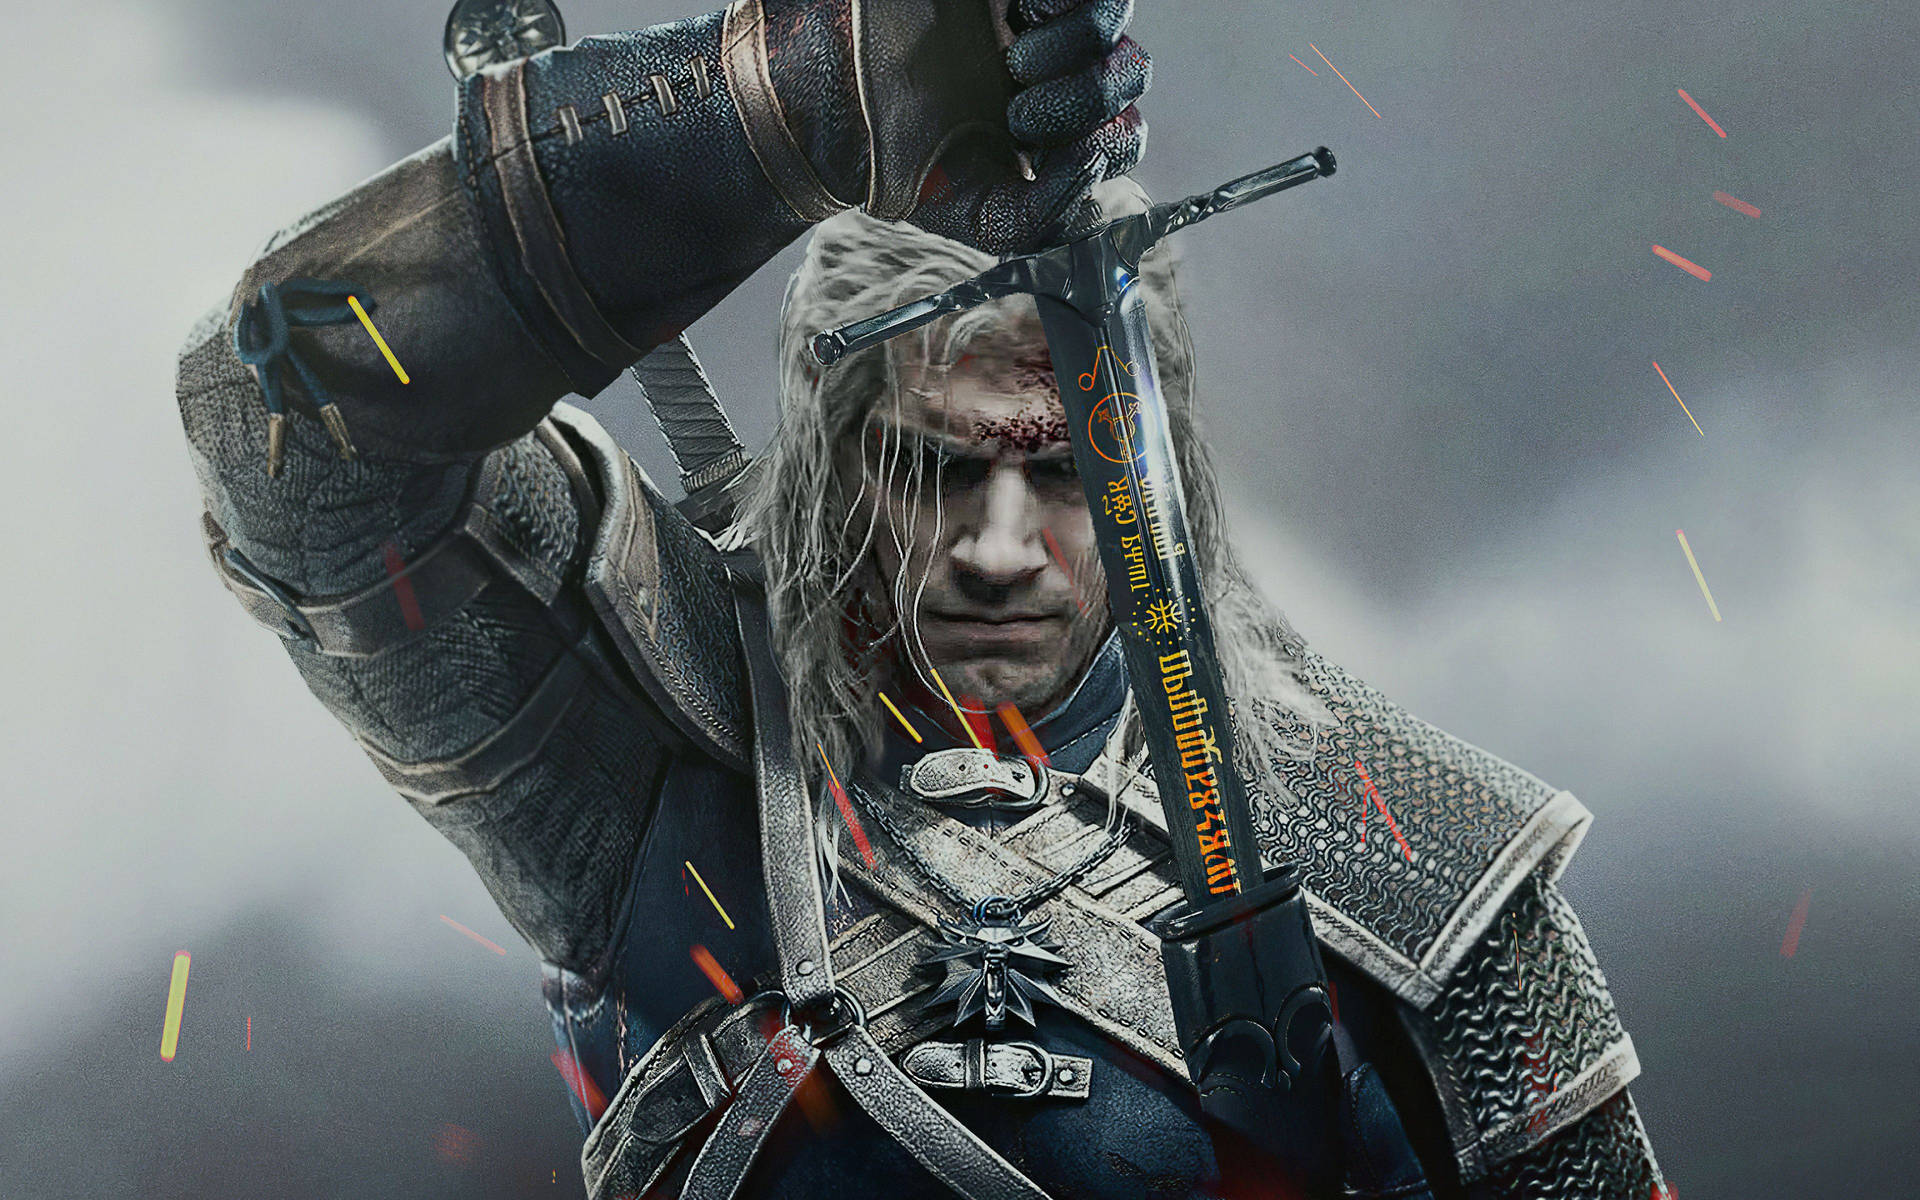 Witcher 4k Geralt Wearing Full Armour